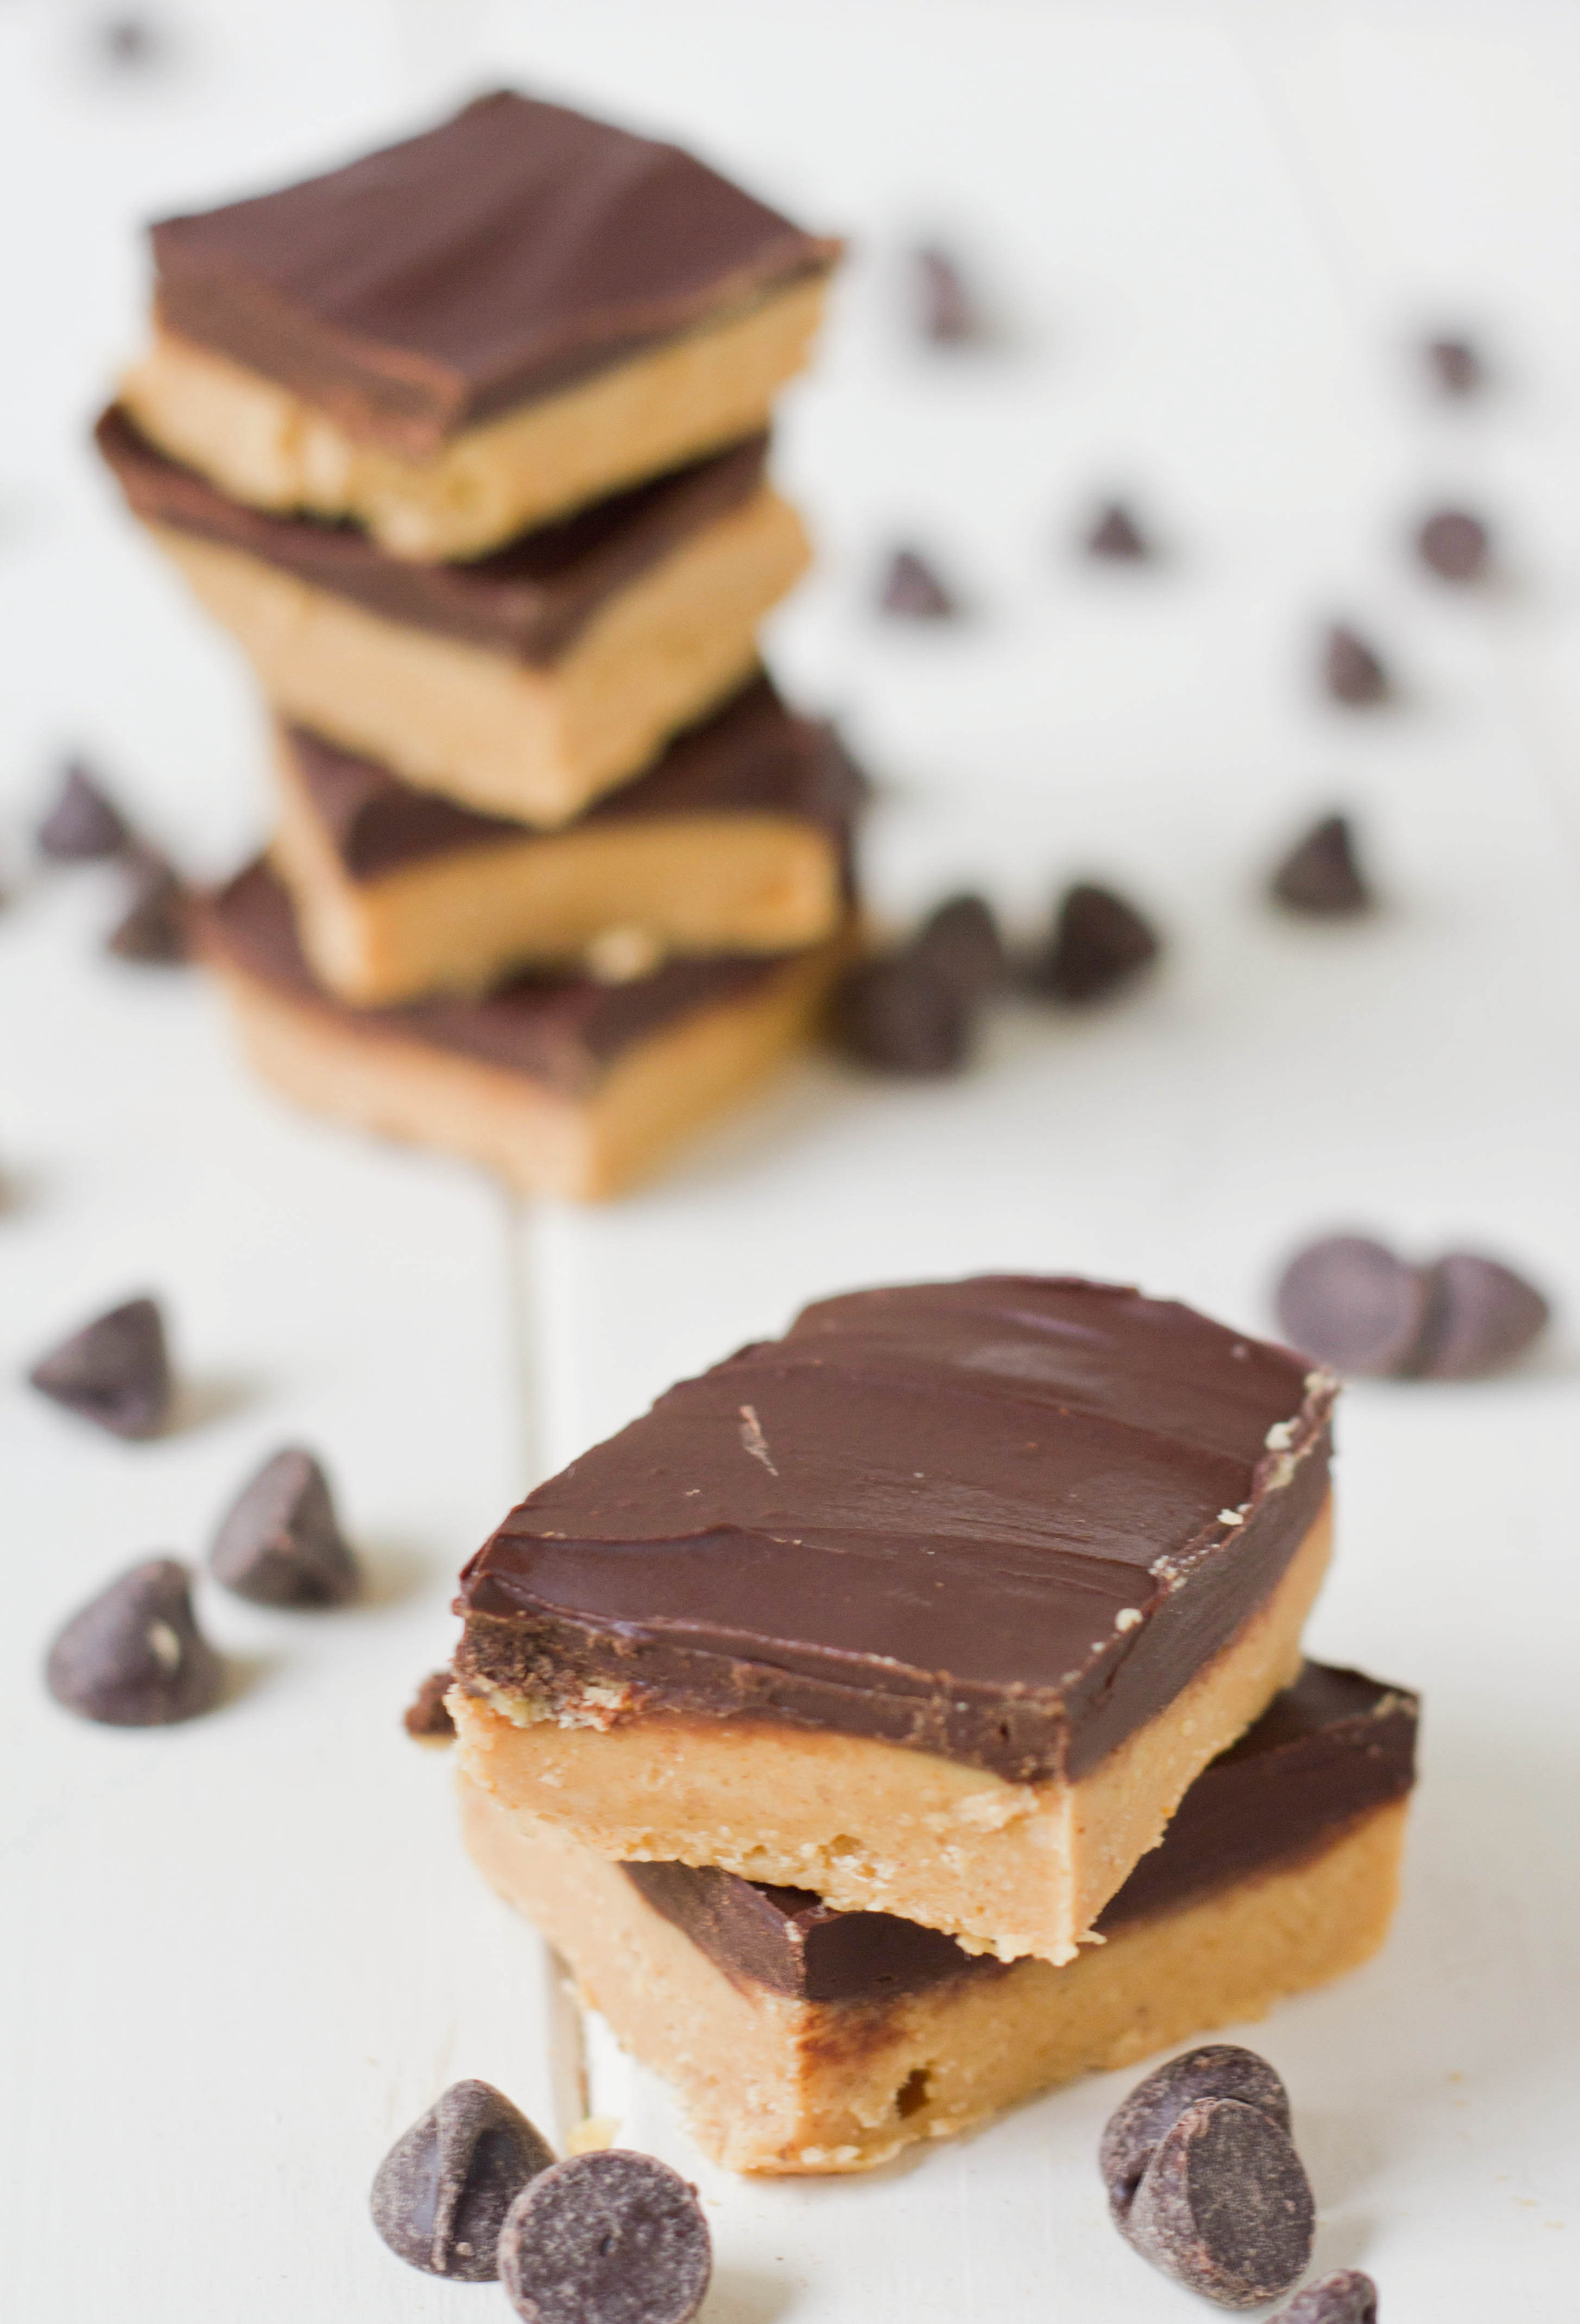 Chocolate Peanut Butter Bars | The Wannabe Chef